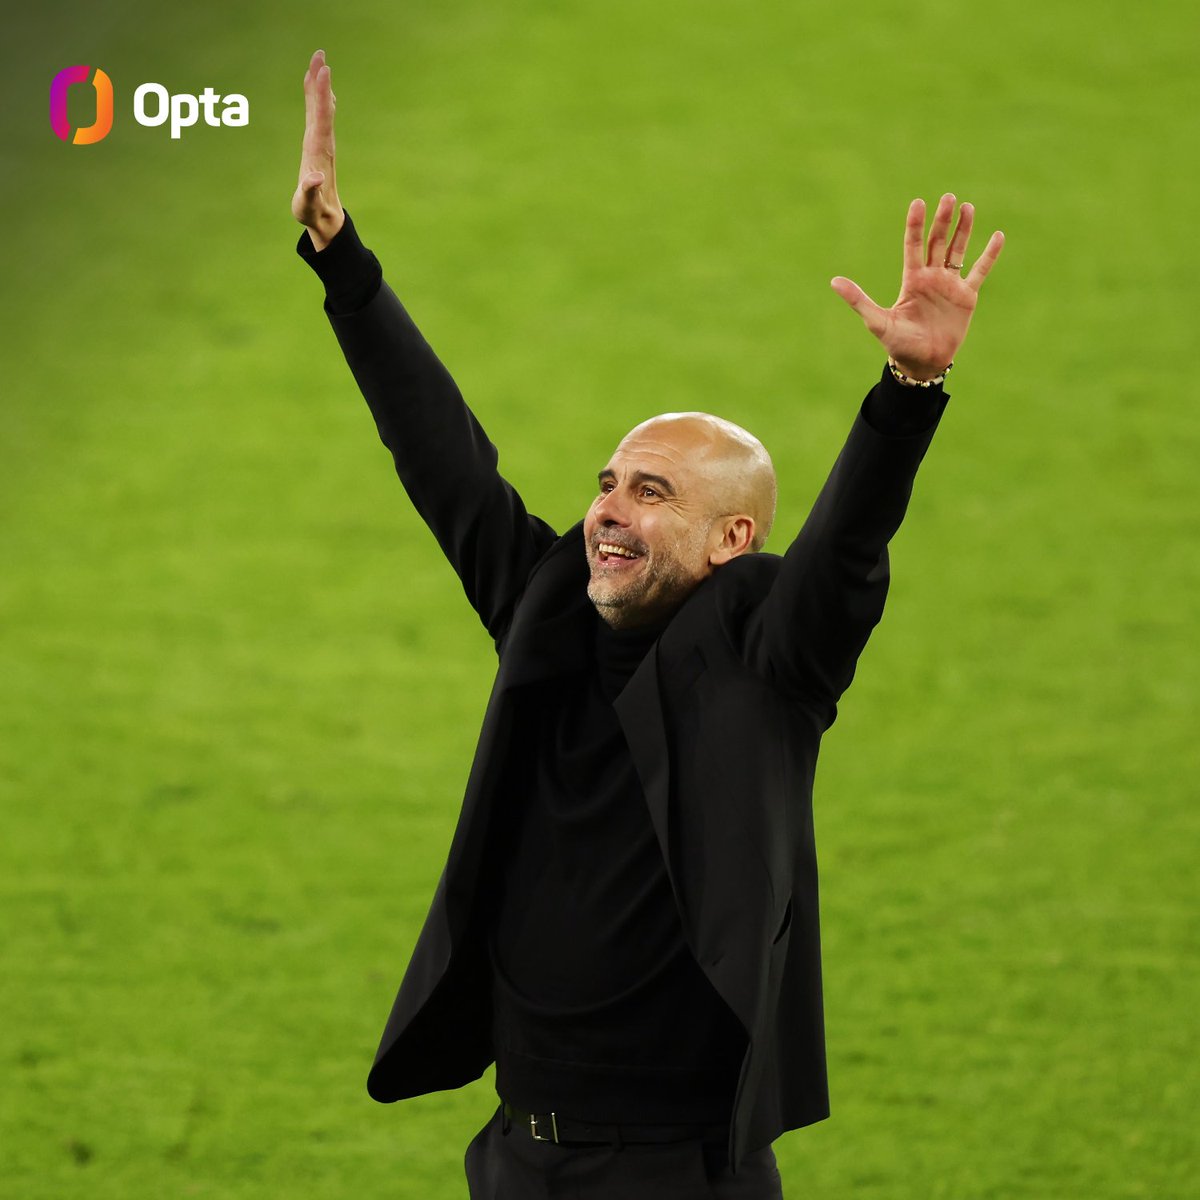 10 - Pep Guardiola is only the fifth manager to win 10+ major honours in charge of English clubs (5x Premier League, 4x League Cup, 1x FA Cup), along with Alex Ferguson, Bob Paisley, George Ramsay & Arsène Wenger. He has done so in just seven seasons with Man City. Elite.